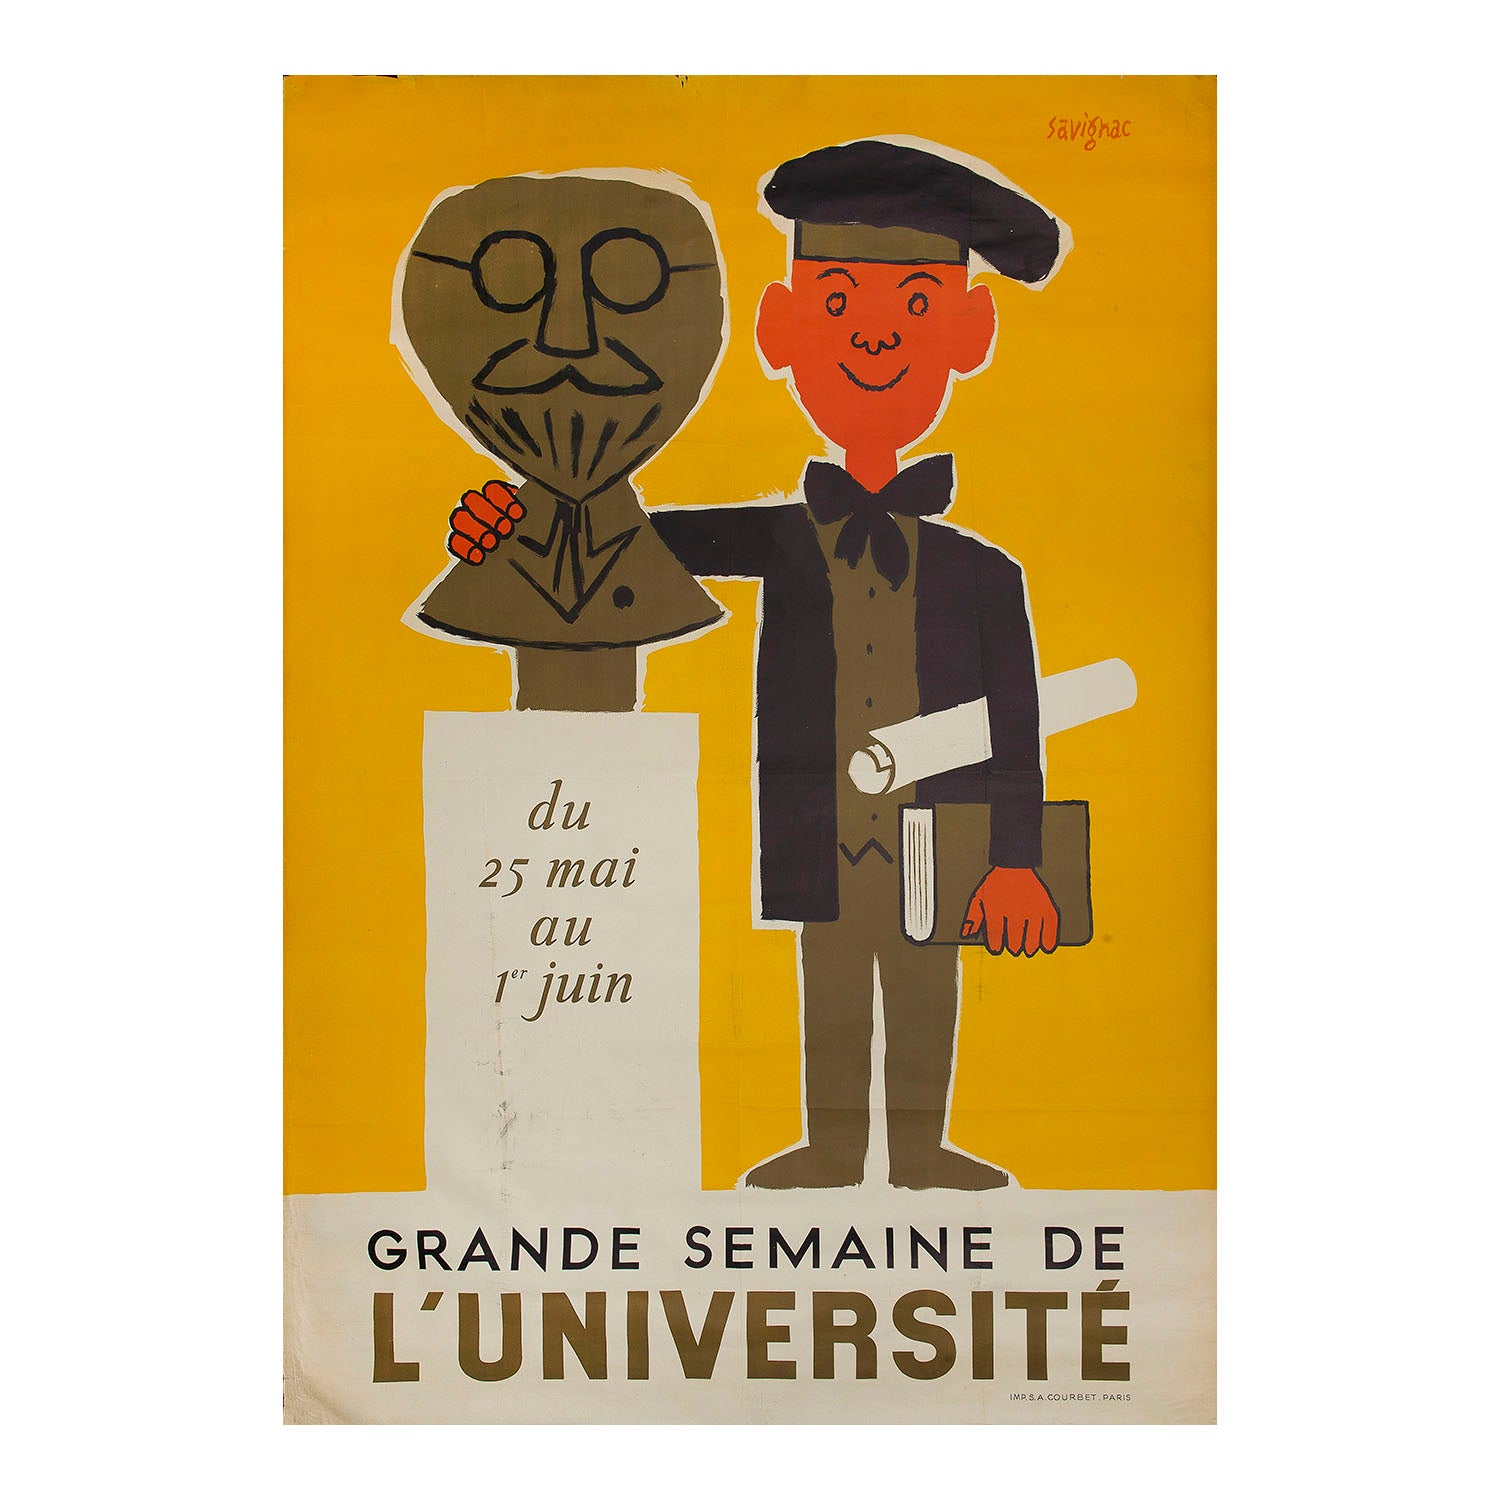 Original poster for Parisian ‘University Week’ by Raymond Savignac 1951. Design depicts student holding diploma & embracing a carved bust